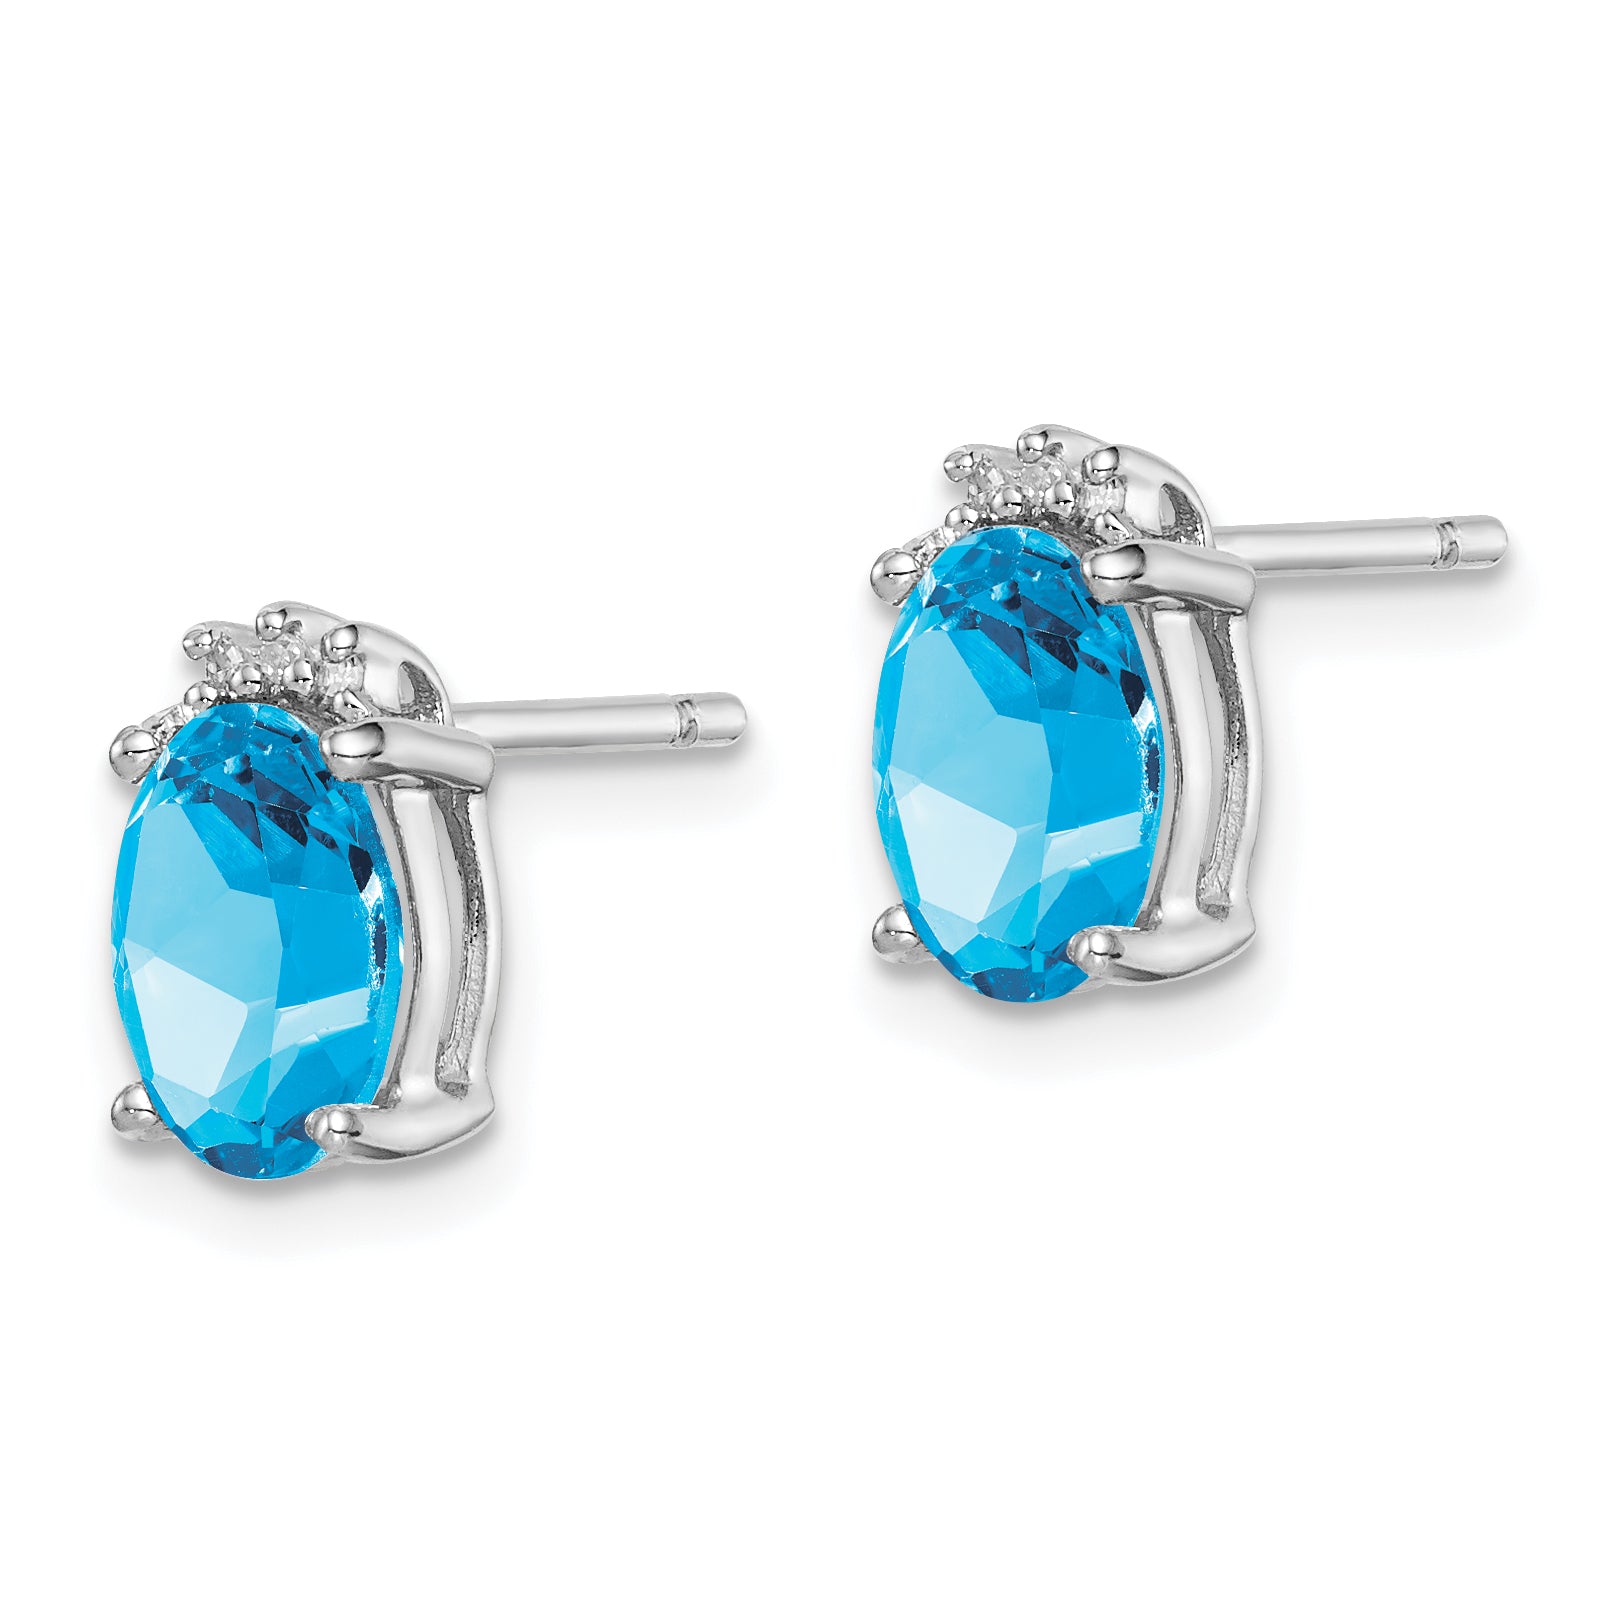 Sterling Silver Rhodium Plated Oval Blue Topaz and Diamond Post Earrings